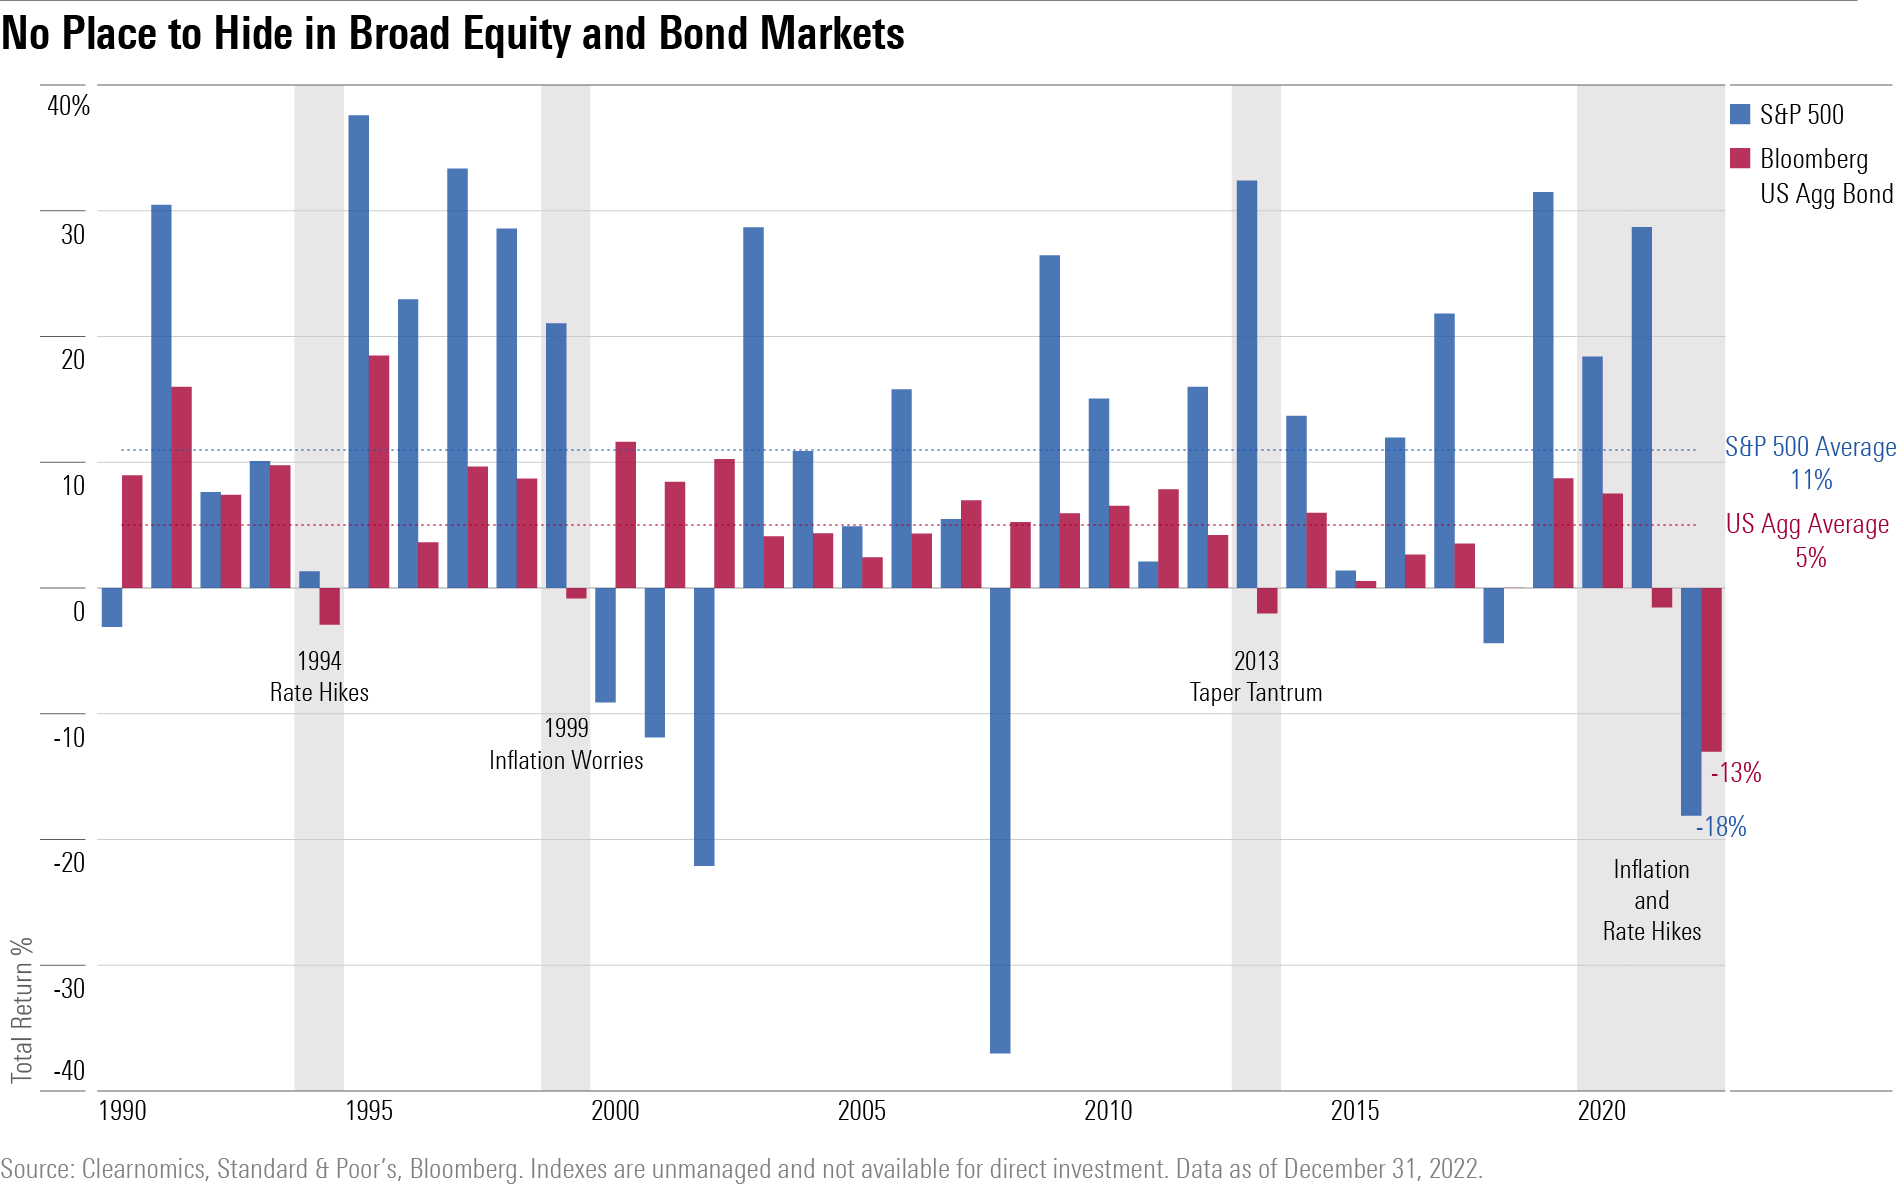 Bar chart showing yearly U.S. stock and bond returns from 1990 to 2022. The average S&P 500 return was 11% and the US Agg averaged 5%.